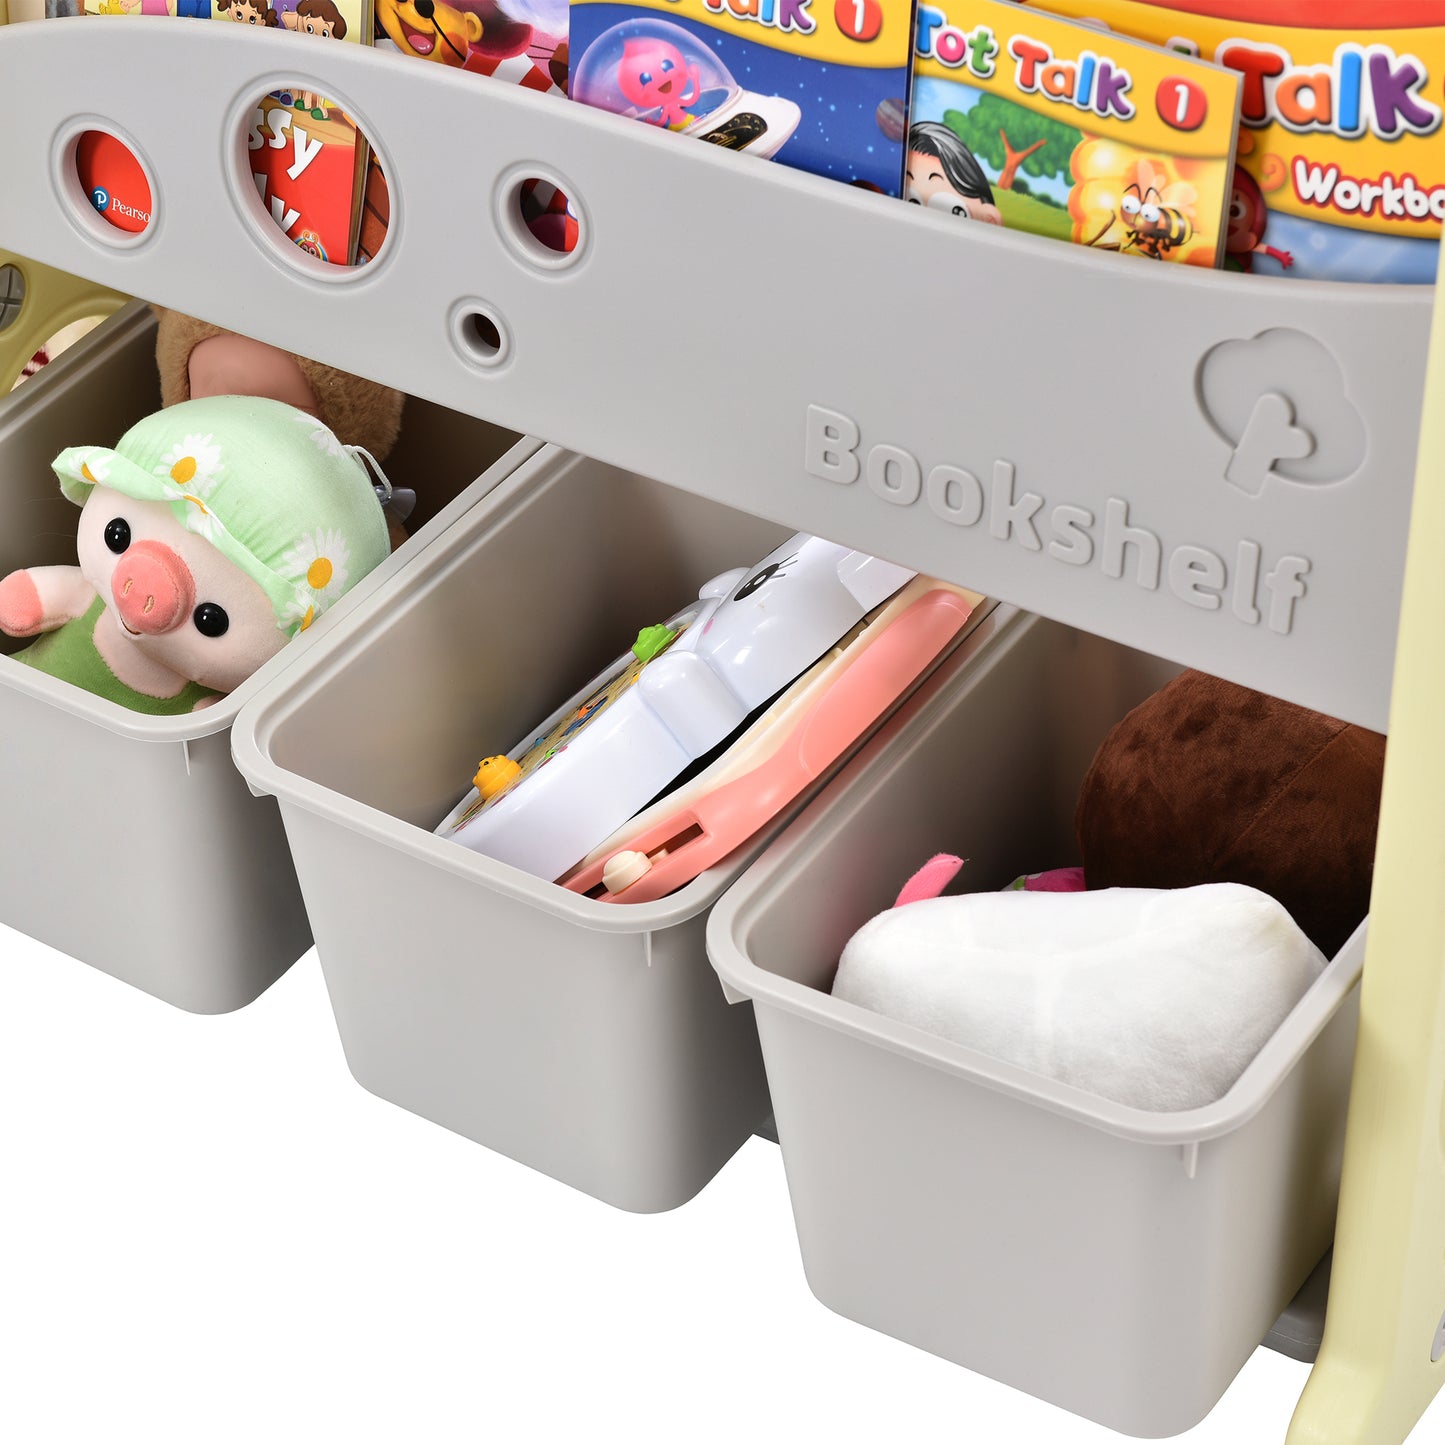 Kids Toy Storage Organizer with 9 Bins, Multi-functional Nursery Organizer Kids Furniture Set Toy Storage Cabinet Unit with HDPE Shelf and Bins for Playroom, Bedroom, Living Room